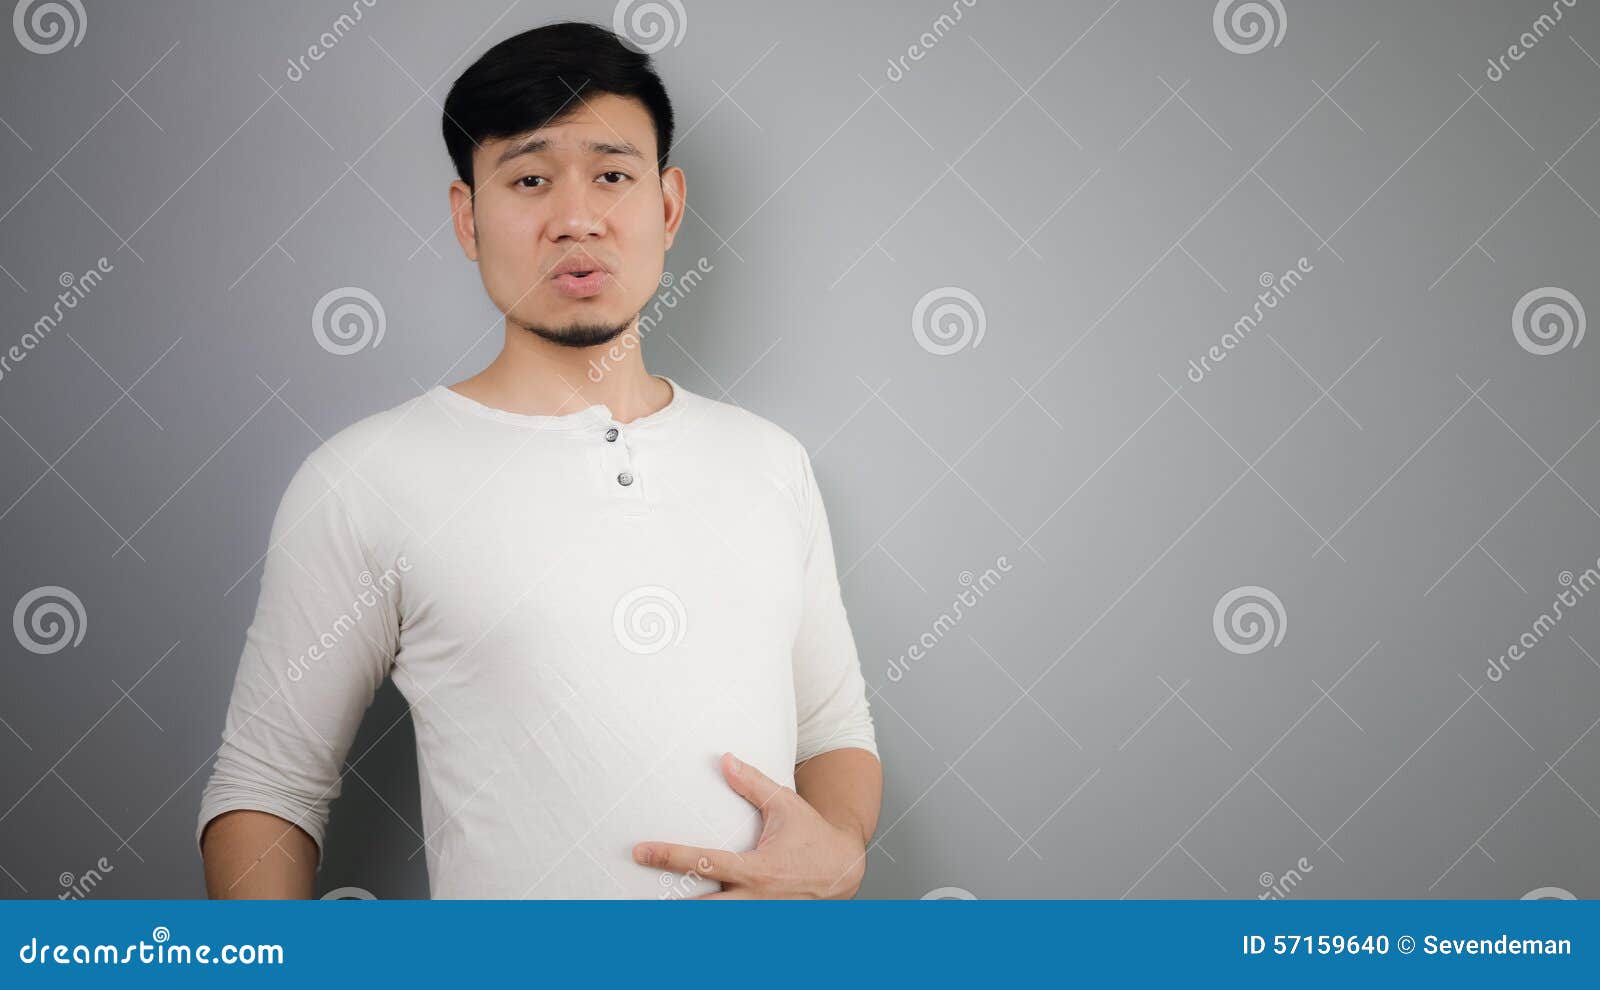 A man with full stomach. stock photo. Image of young - 57159640